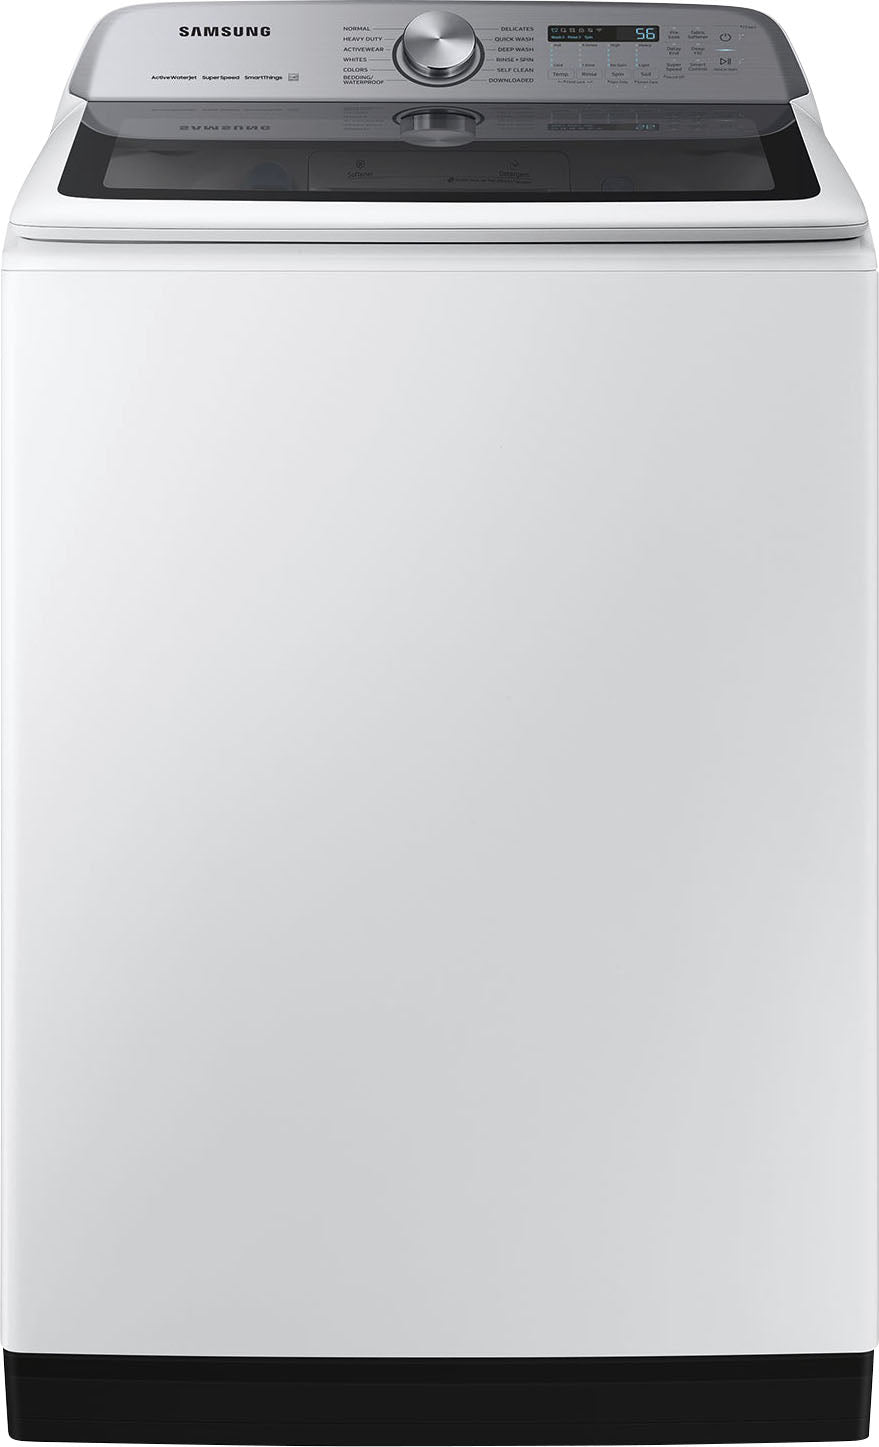 Samsung - 5.2 Cu. Ft. High-Efficiency Smart Top Load Washer with Super Speed Wash - White_0